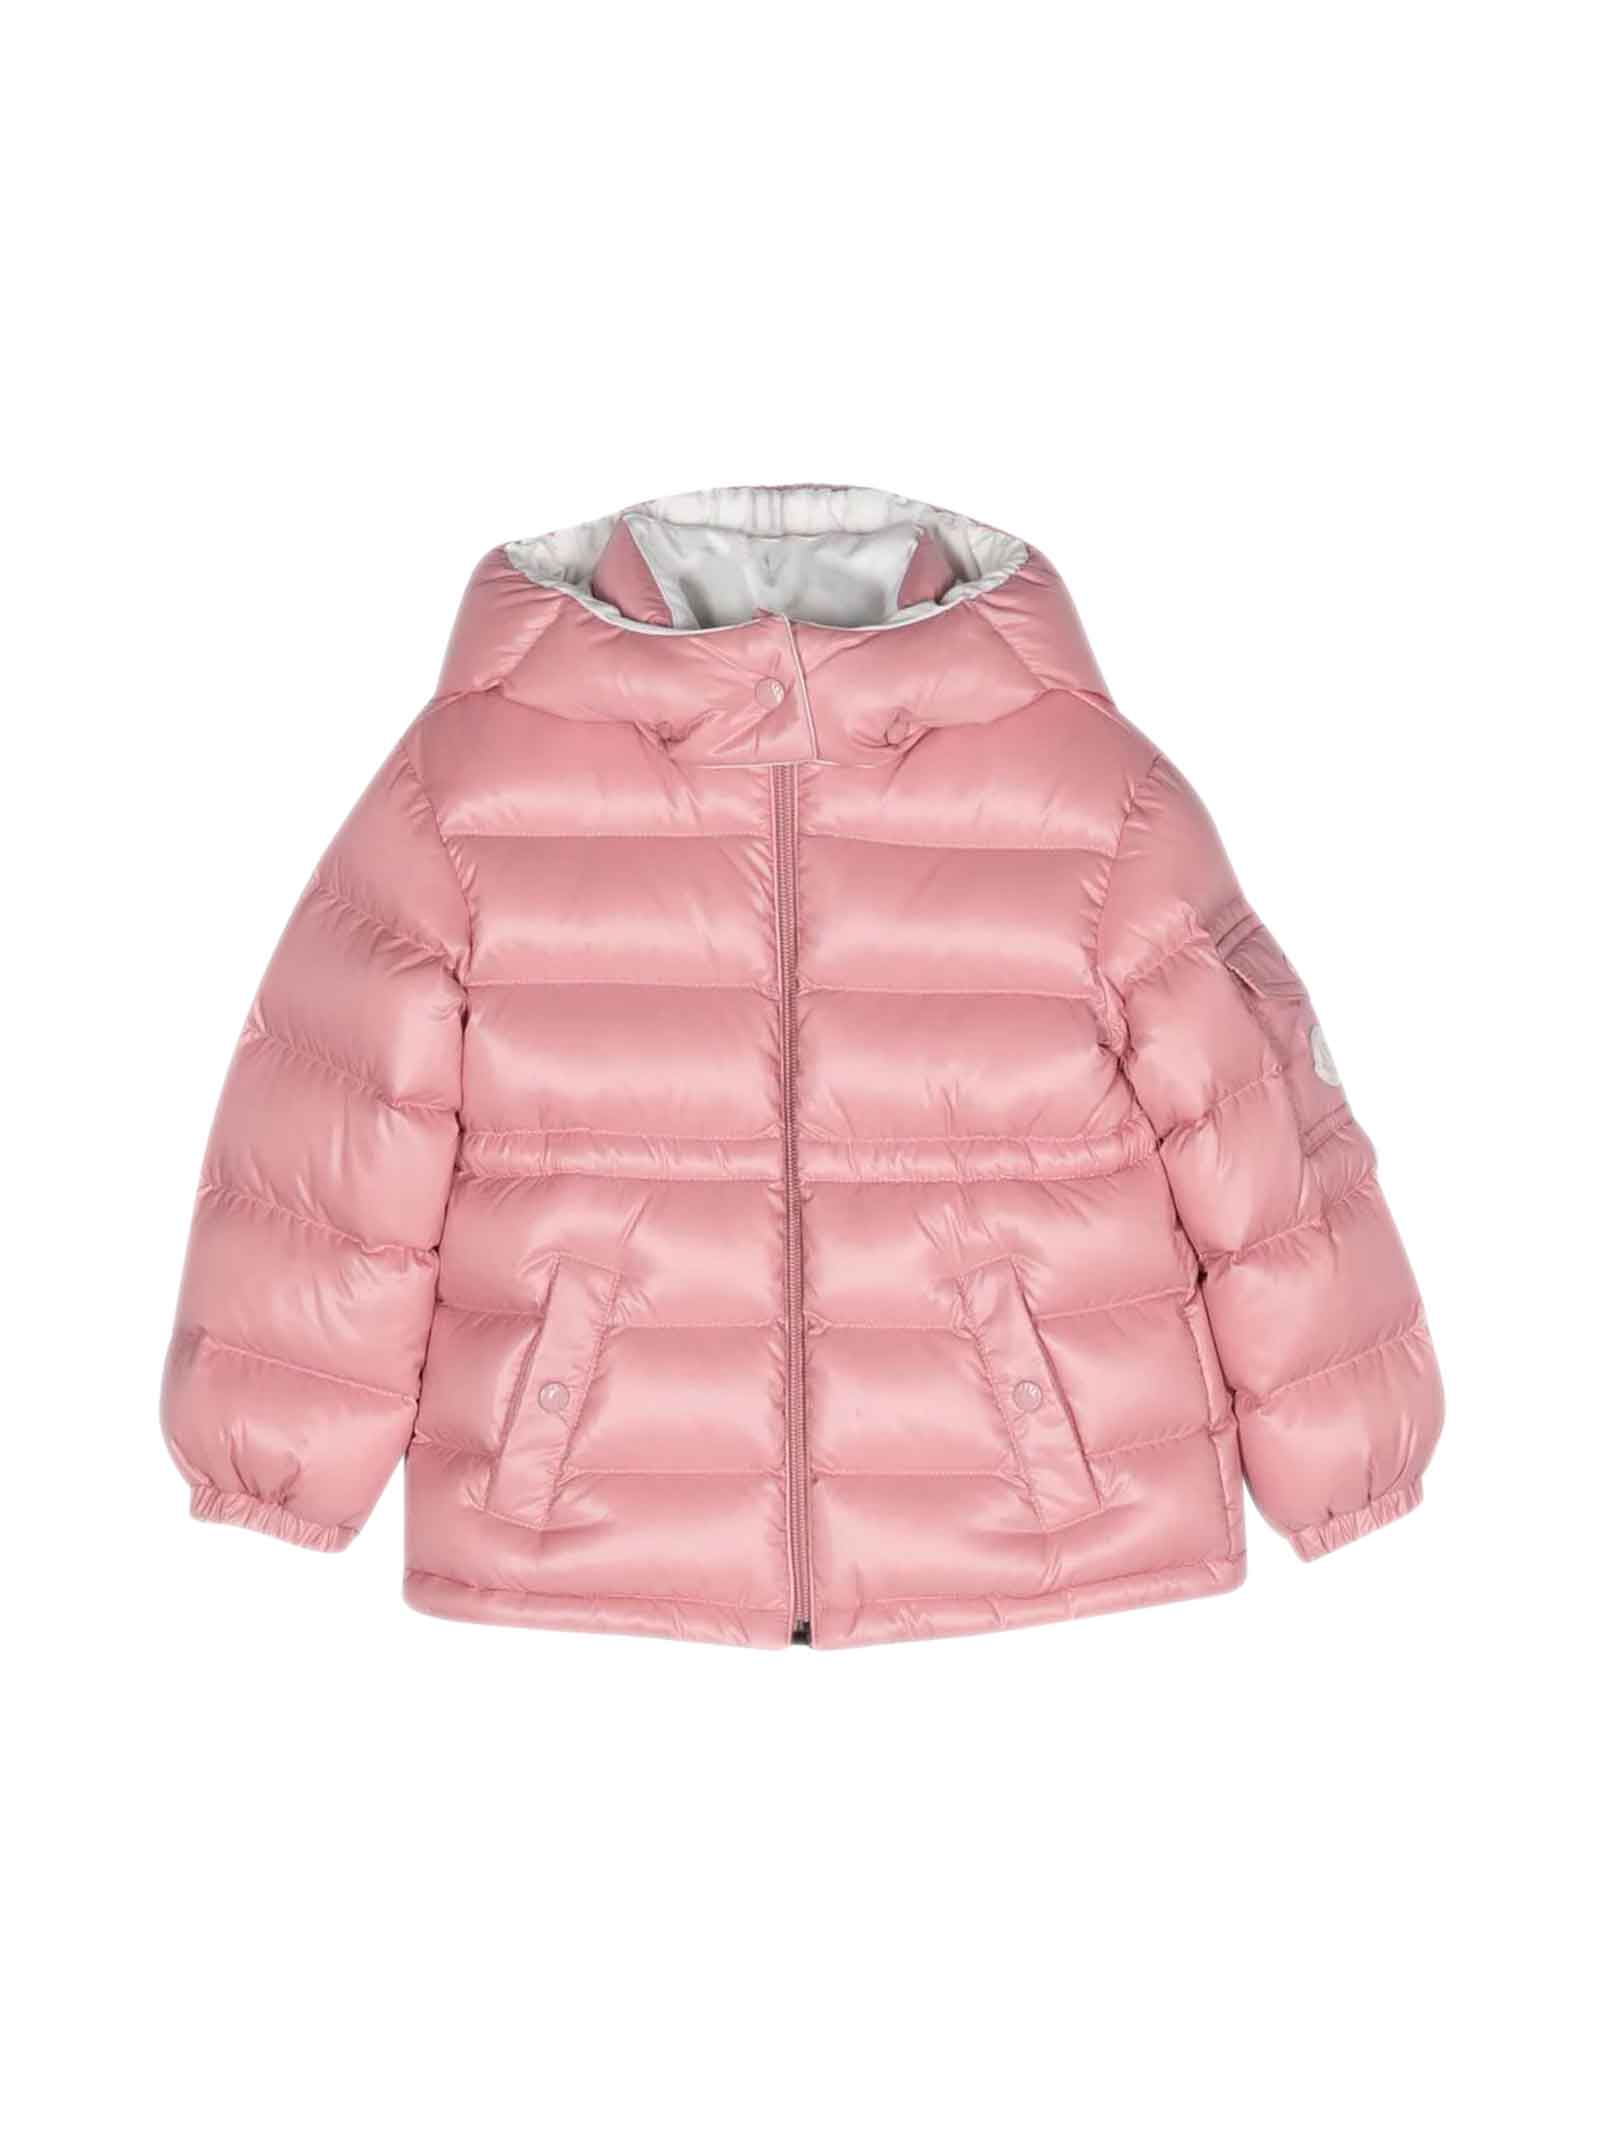 MONCLER PINK DOWN JACKET BABY UNISEX